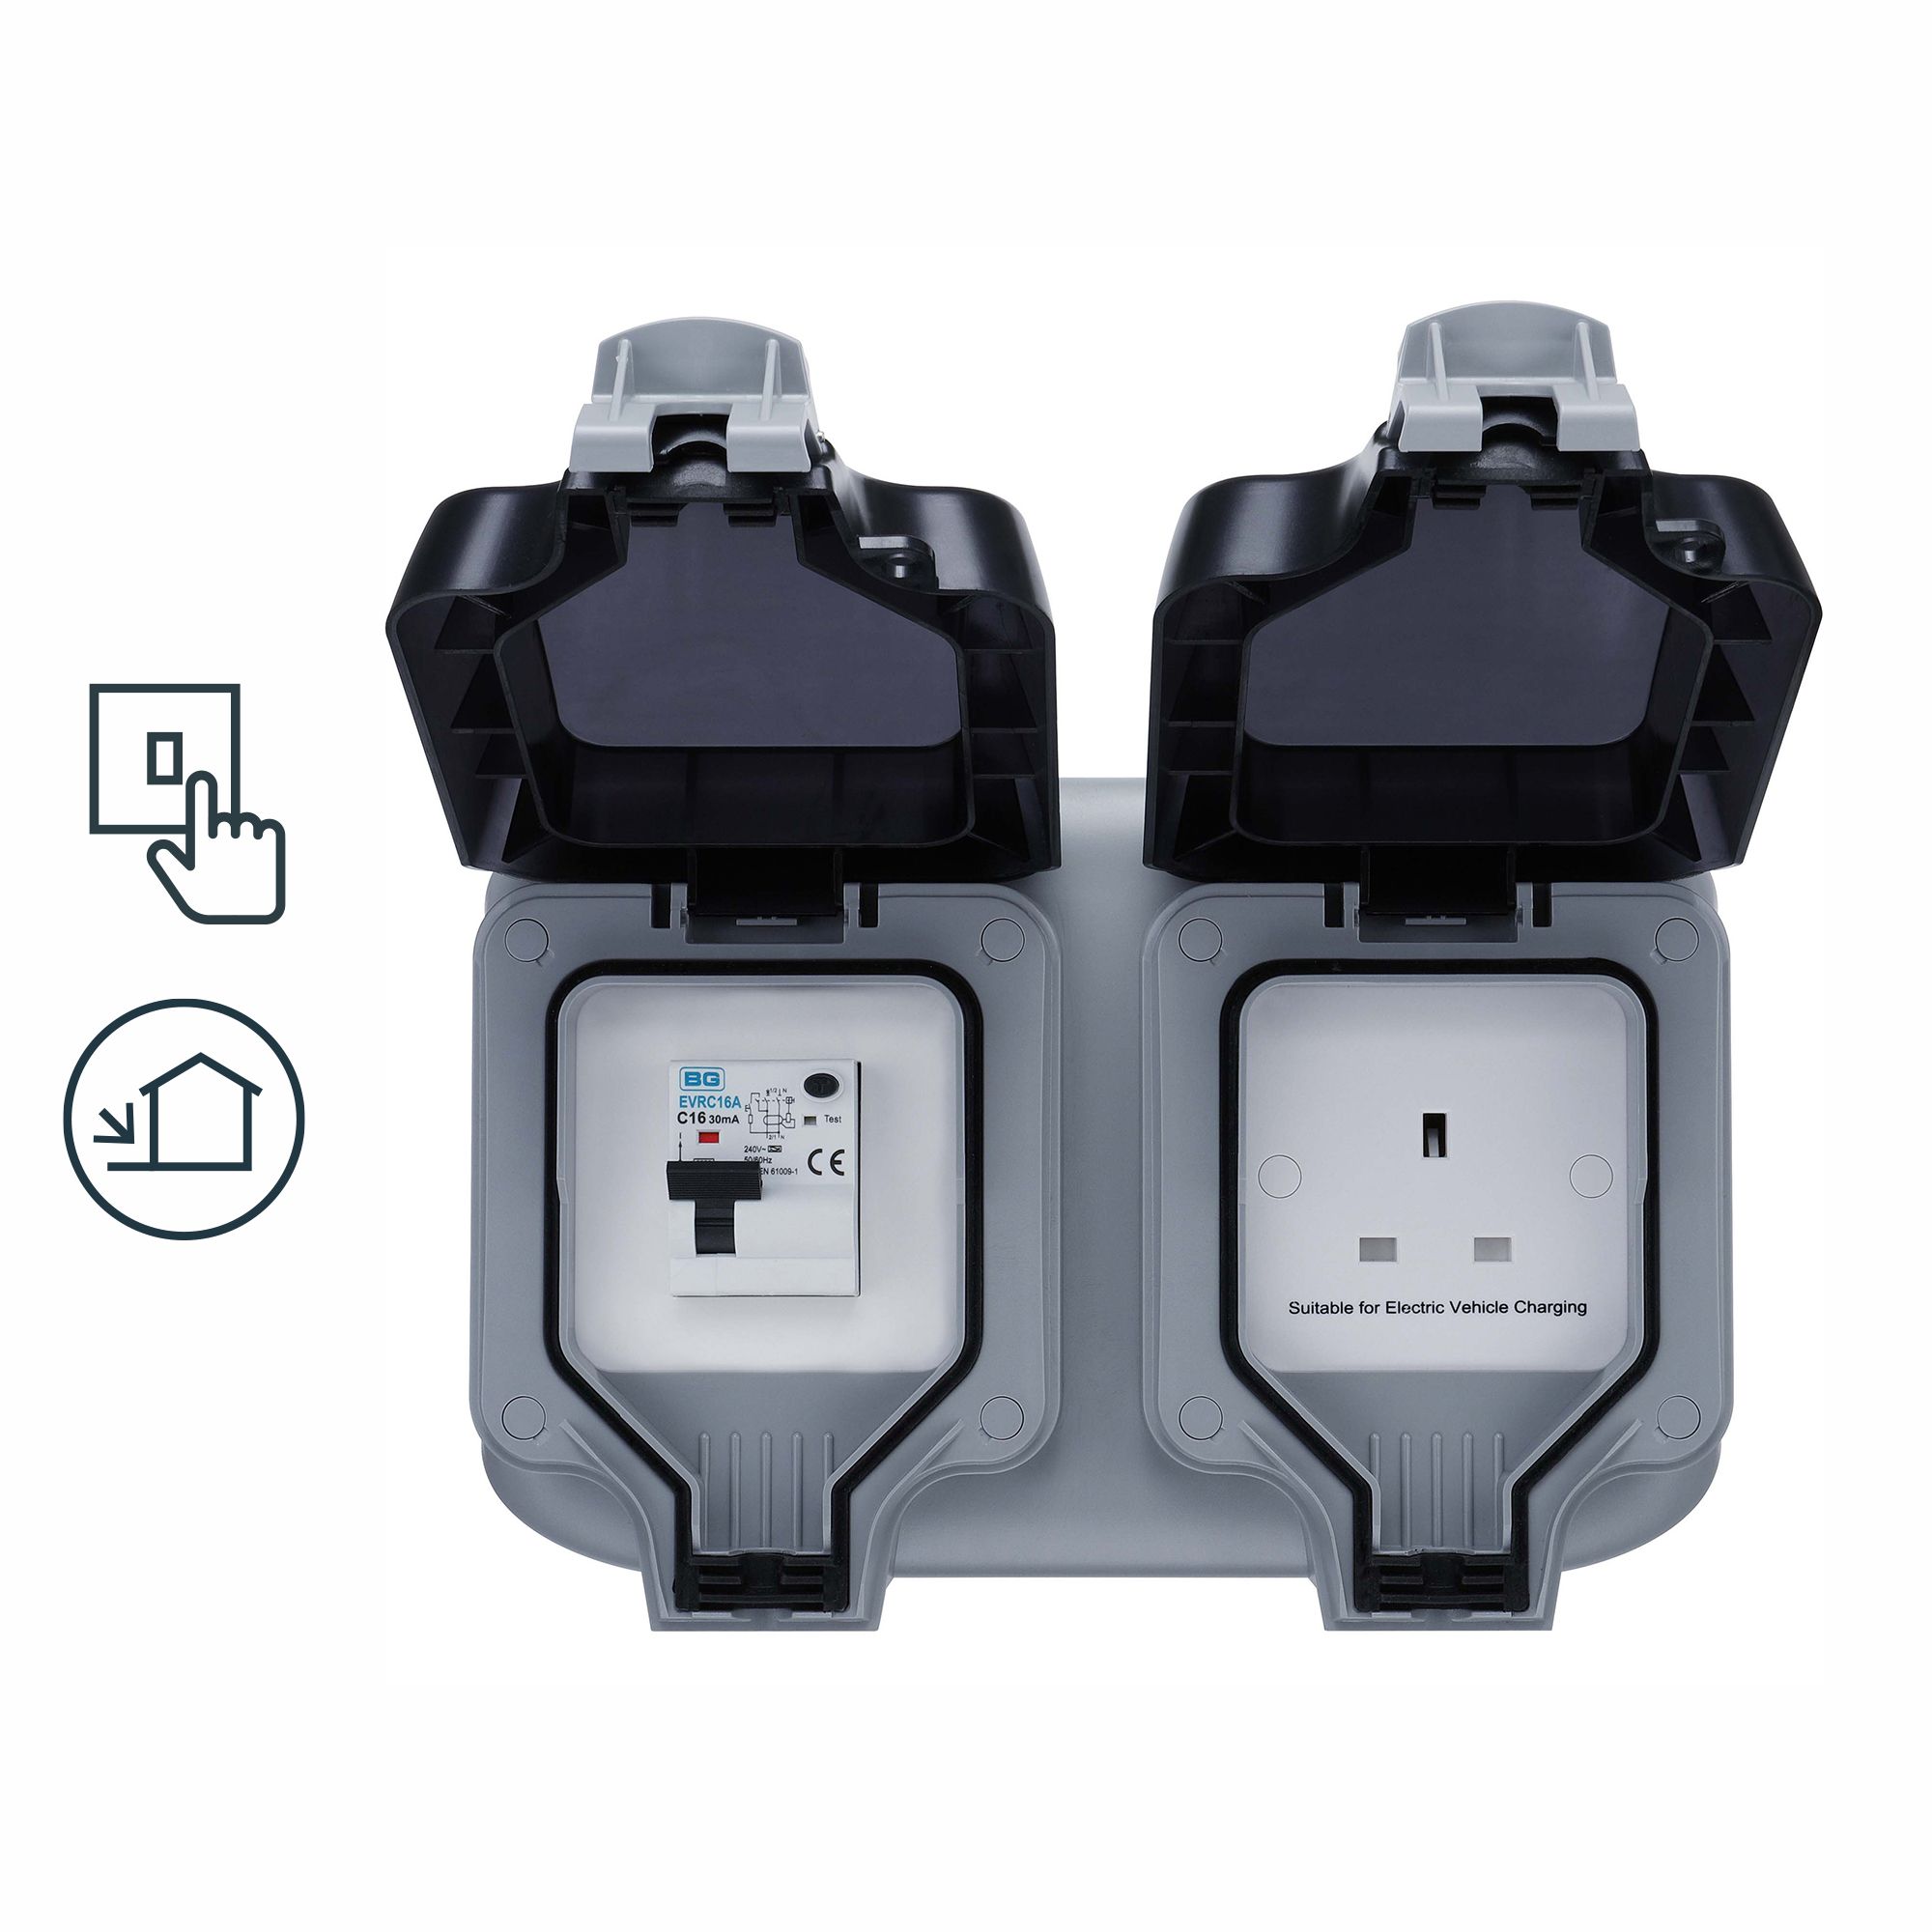 Masterplug Waterproof 13A Mains-powered RCBO protected outdoor socket